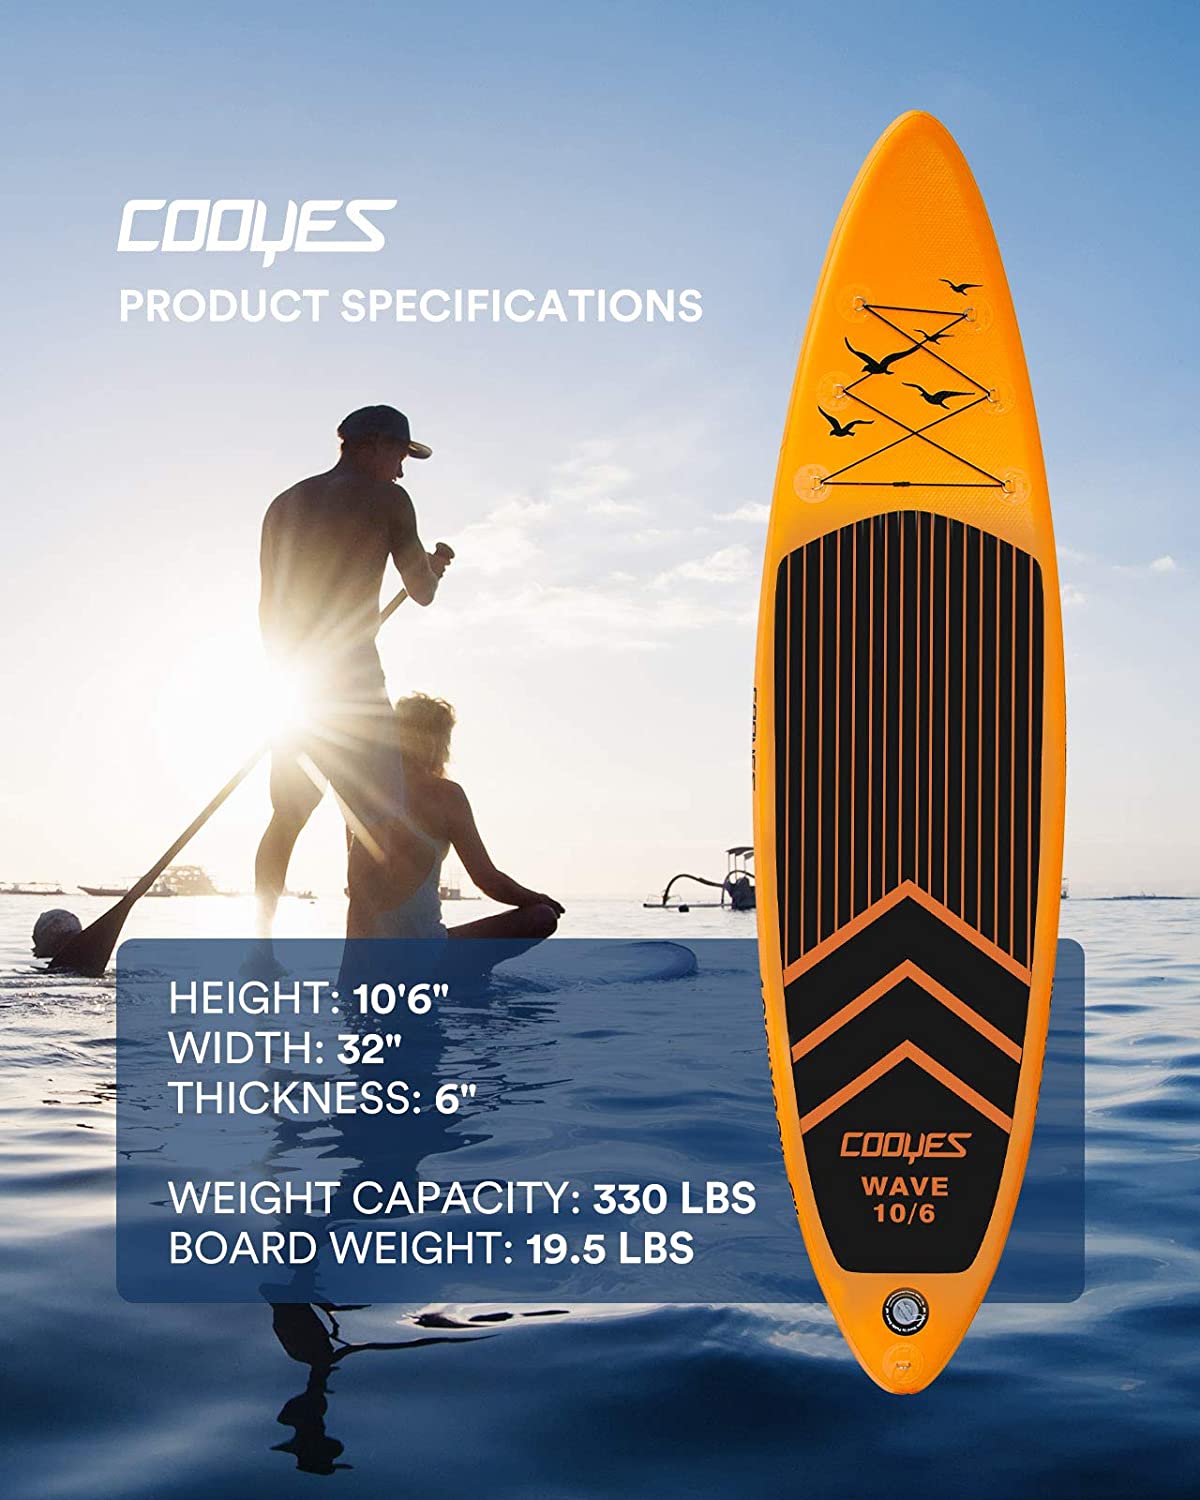 Cooyes Inflatable Stand Up Paddle Board 10'6" with Free Premium SUP Accessories & Backpack, Non-Slip Deck. Bonus Waterproof Bag, Leash, Paddle and Hand Pump - (For 1 piece(s))